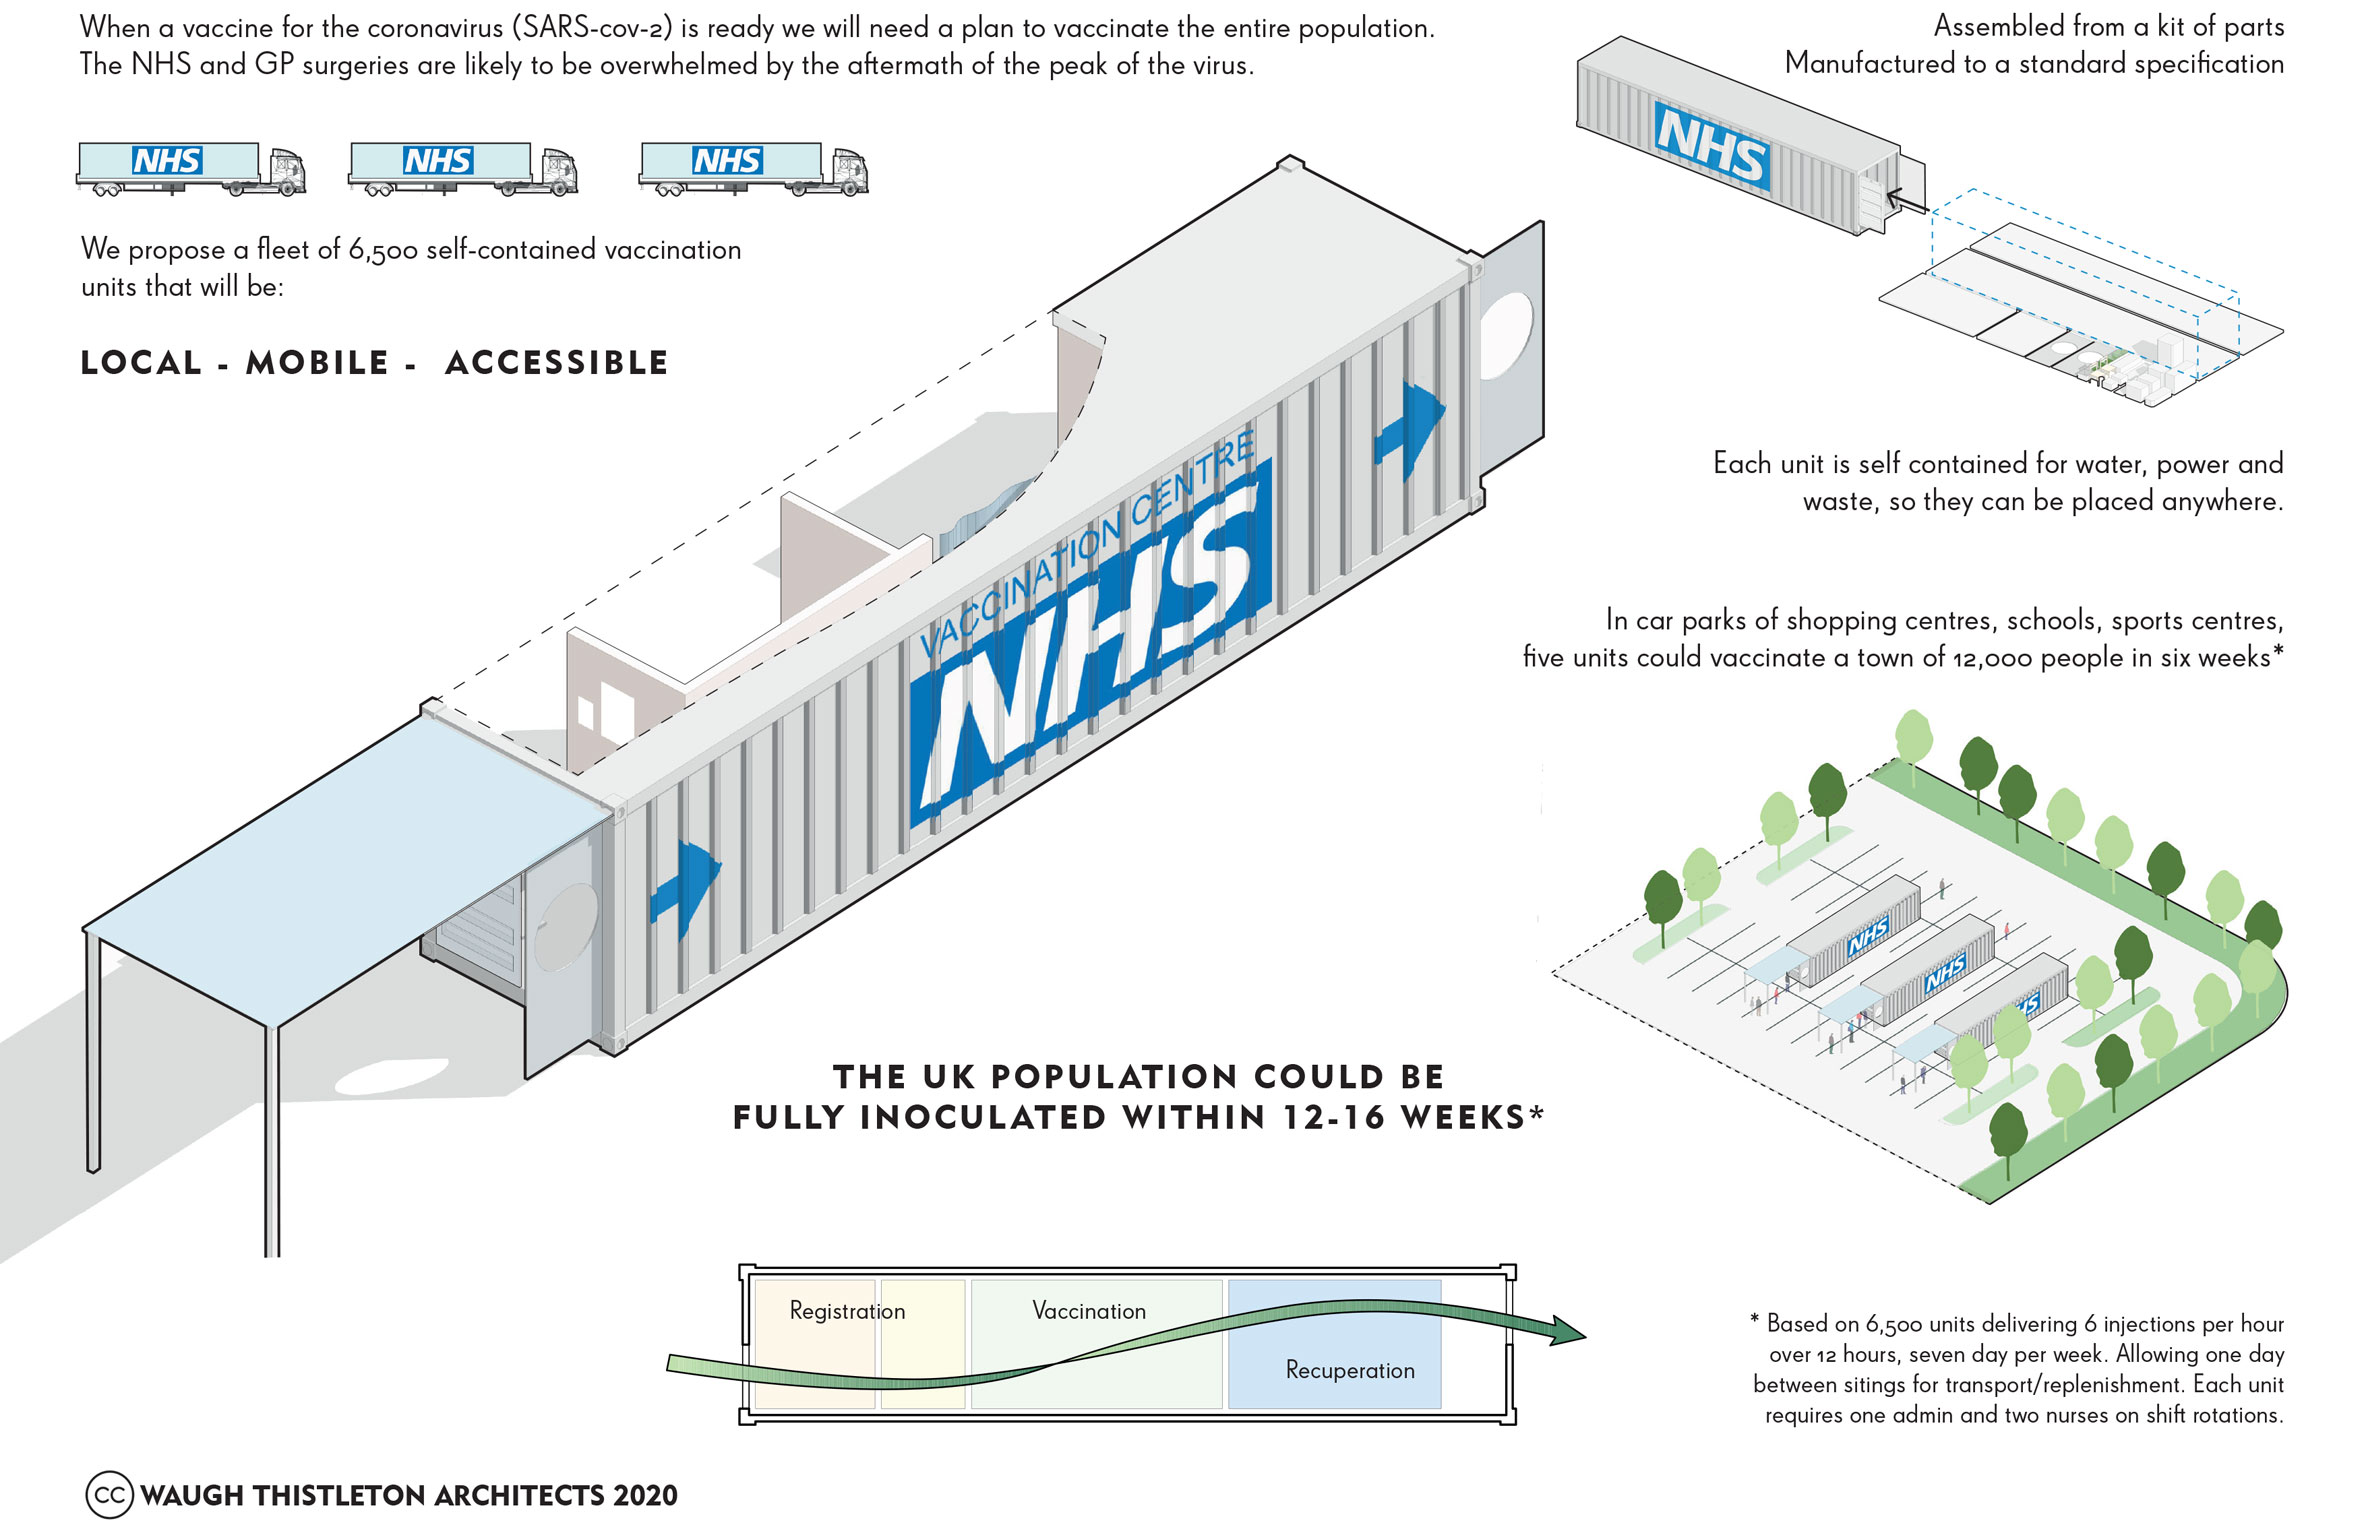 Shipping-containter Vaccincation Centres by Waugh Thistleton Architects